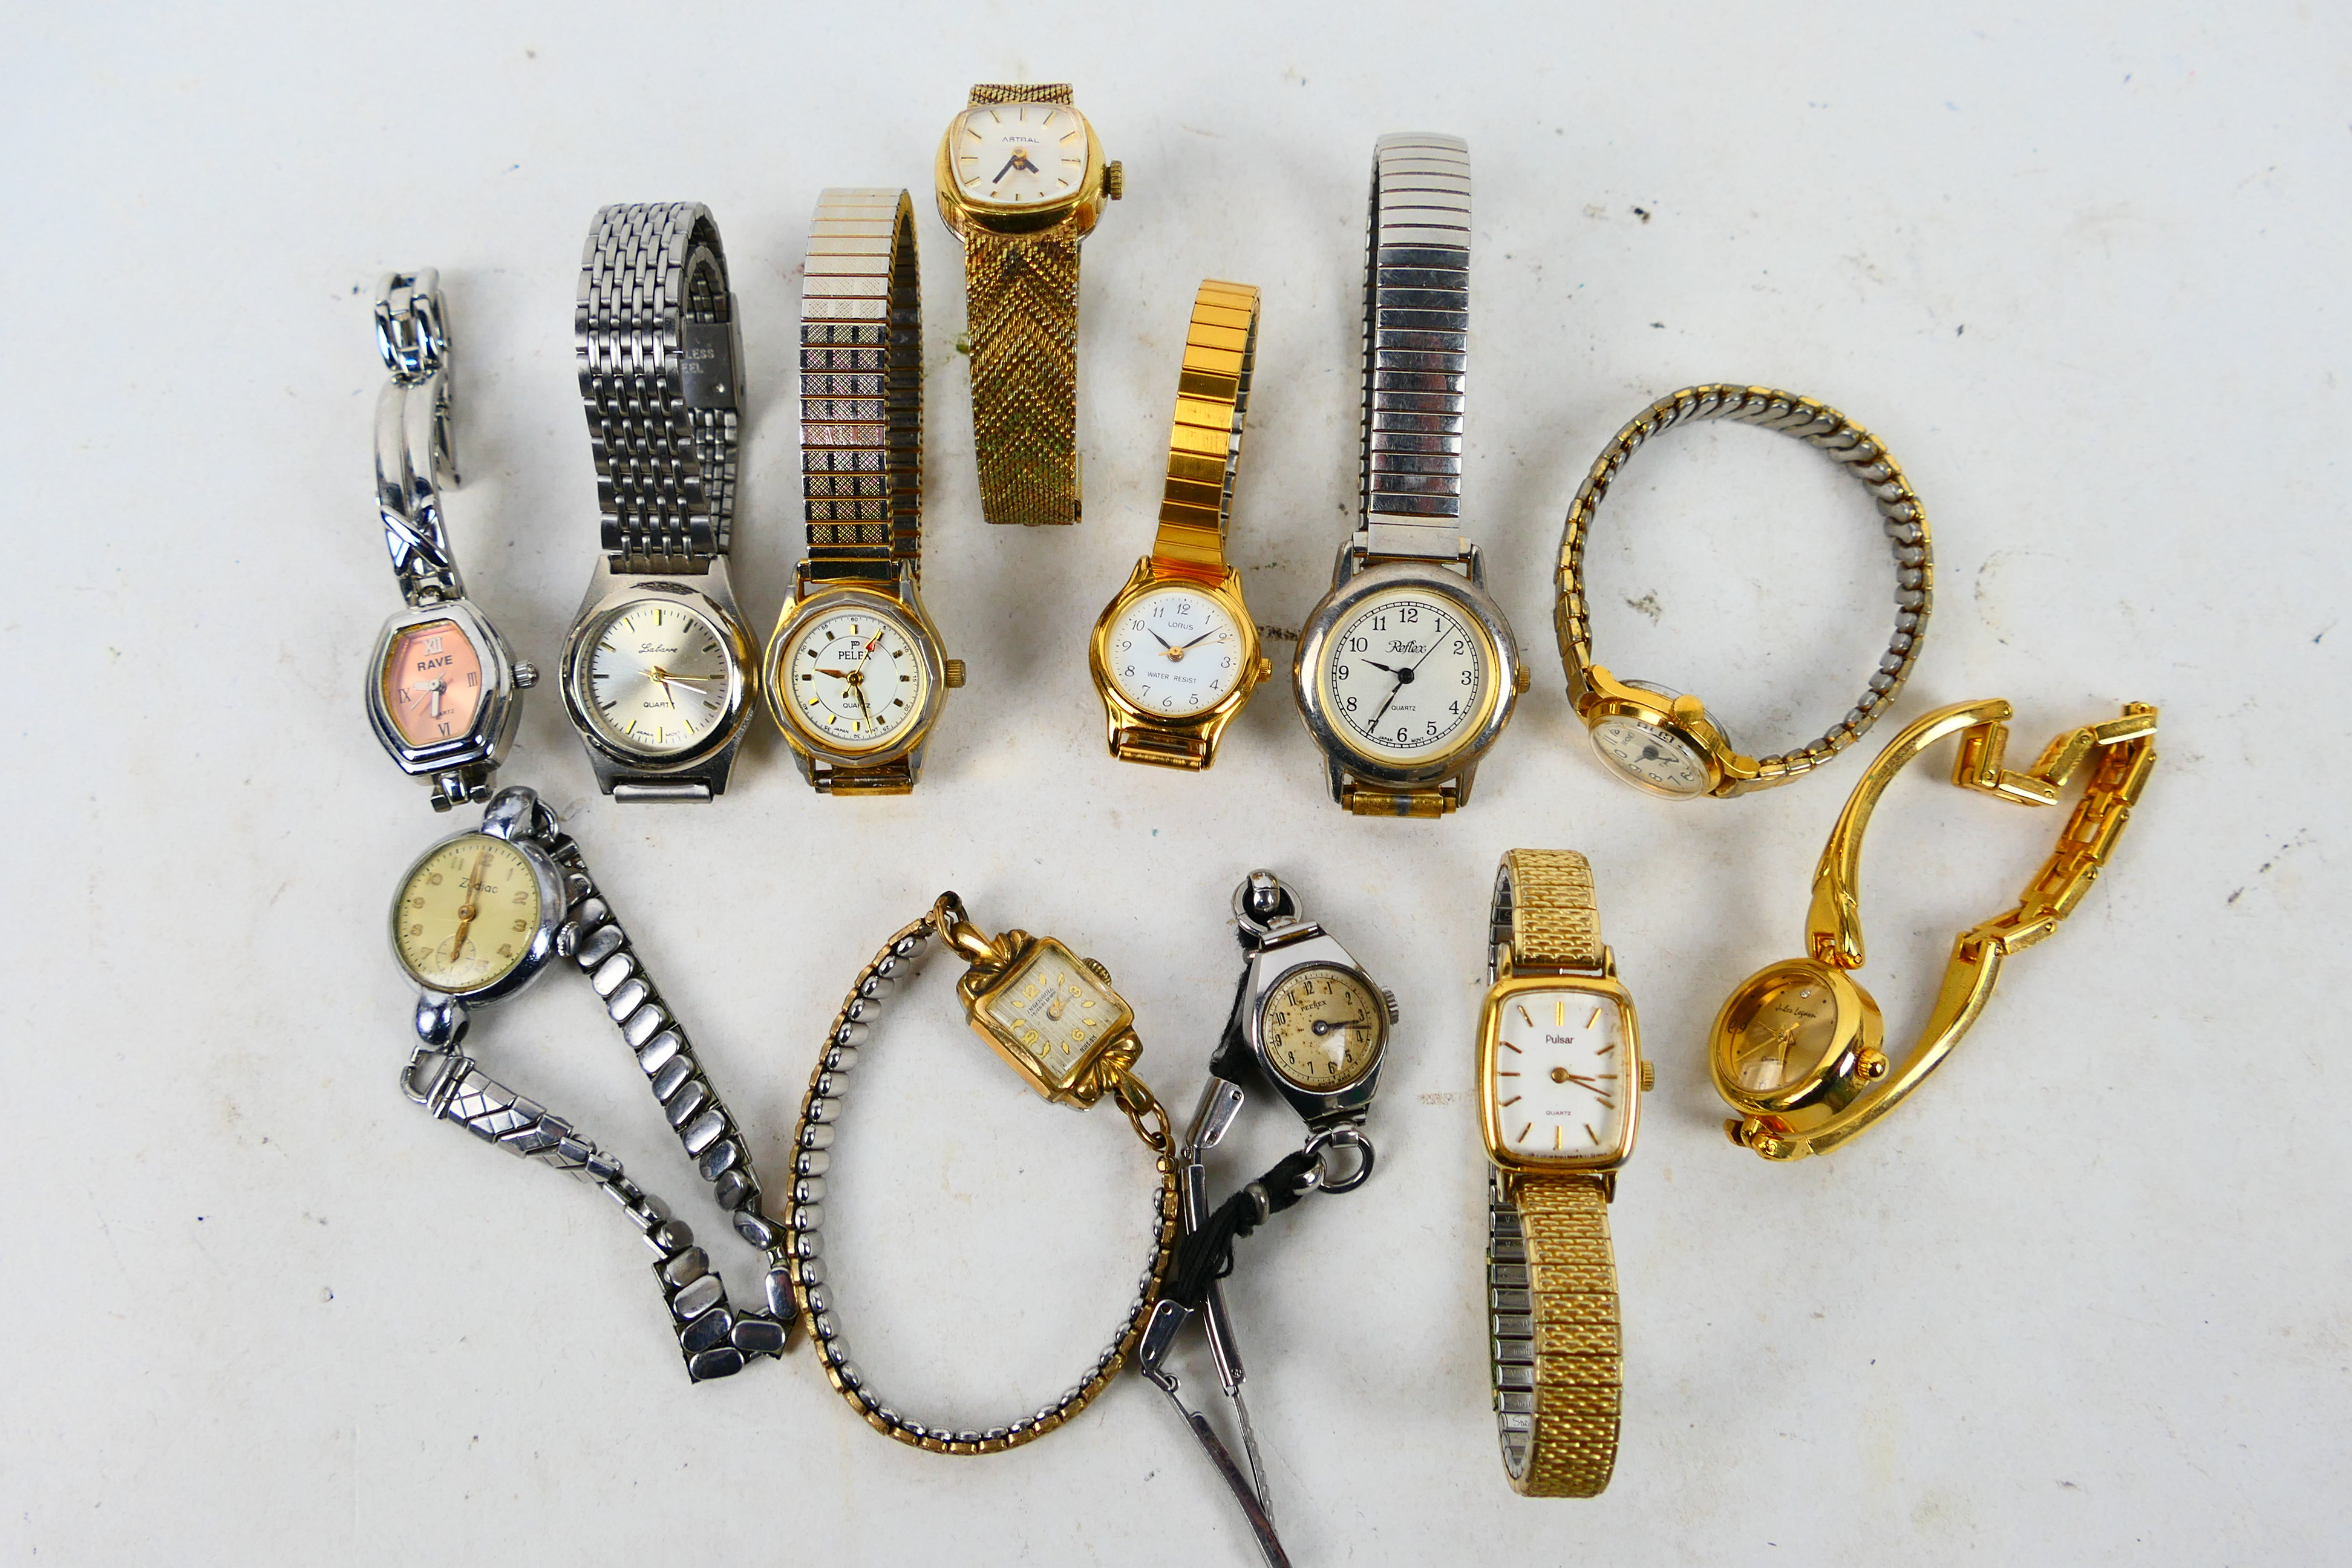 A collection of wrist watches to include Sekonda, Ingersoll, Reflex, Pulsar and similar.